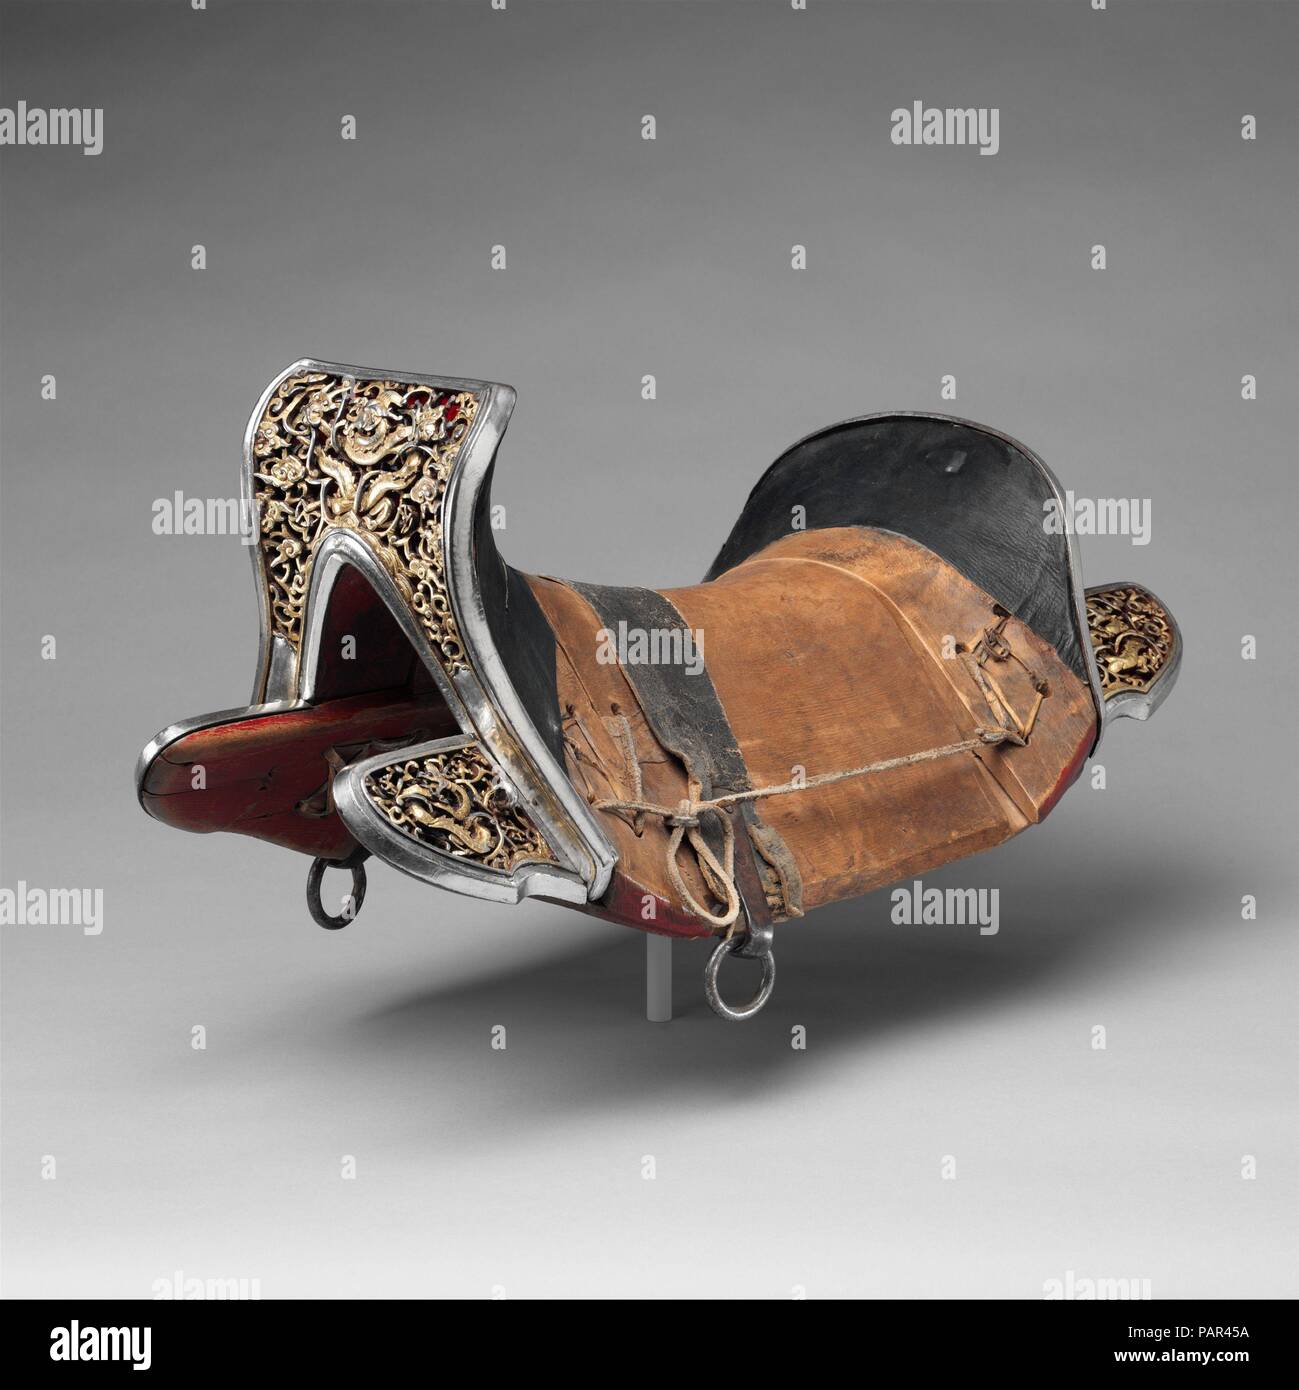 Saddle (gser sga). Culture: Eastern Tibetan or Chinese for the Tibetan market. Dimensions: H. 10 3/4 in. (27.3 cm); L. 22 1/2 in. (57.2 cm); W. 11 3/4 in. (29.8 cm). Date: 17th-18th century.  This saddle represents a particular form found in Tibet, one that is Chinese or strongly influenced by Chinese types. It belongs to a small group of closely related saddles that may stem from a single workshop or reflect a specific type developed in one region. Notable features are the lively dragons, chiseled free from the scrollwork ground, and the unusual decorative technique involving silver damasceni Stock Photo